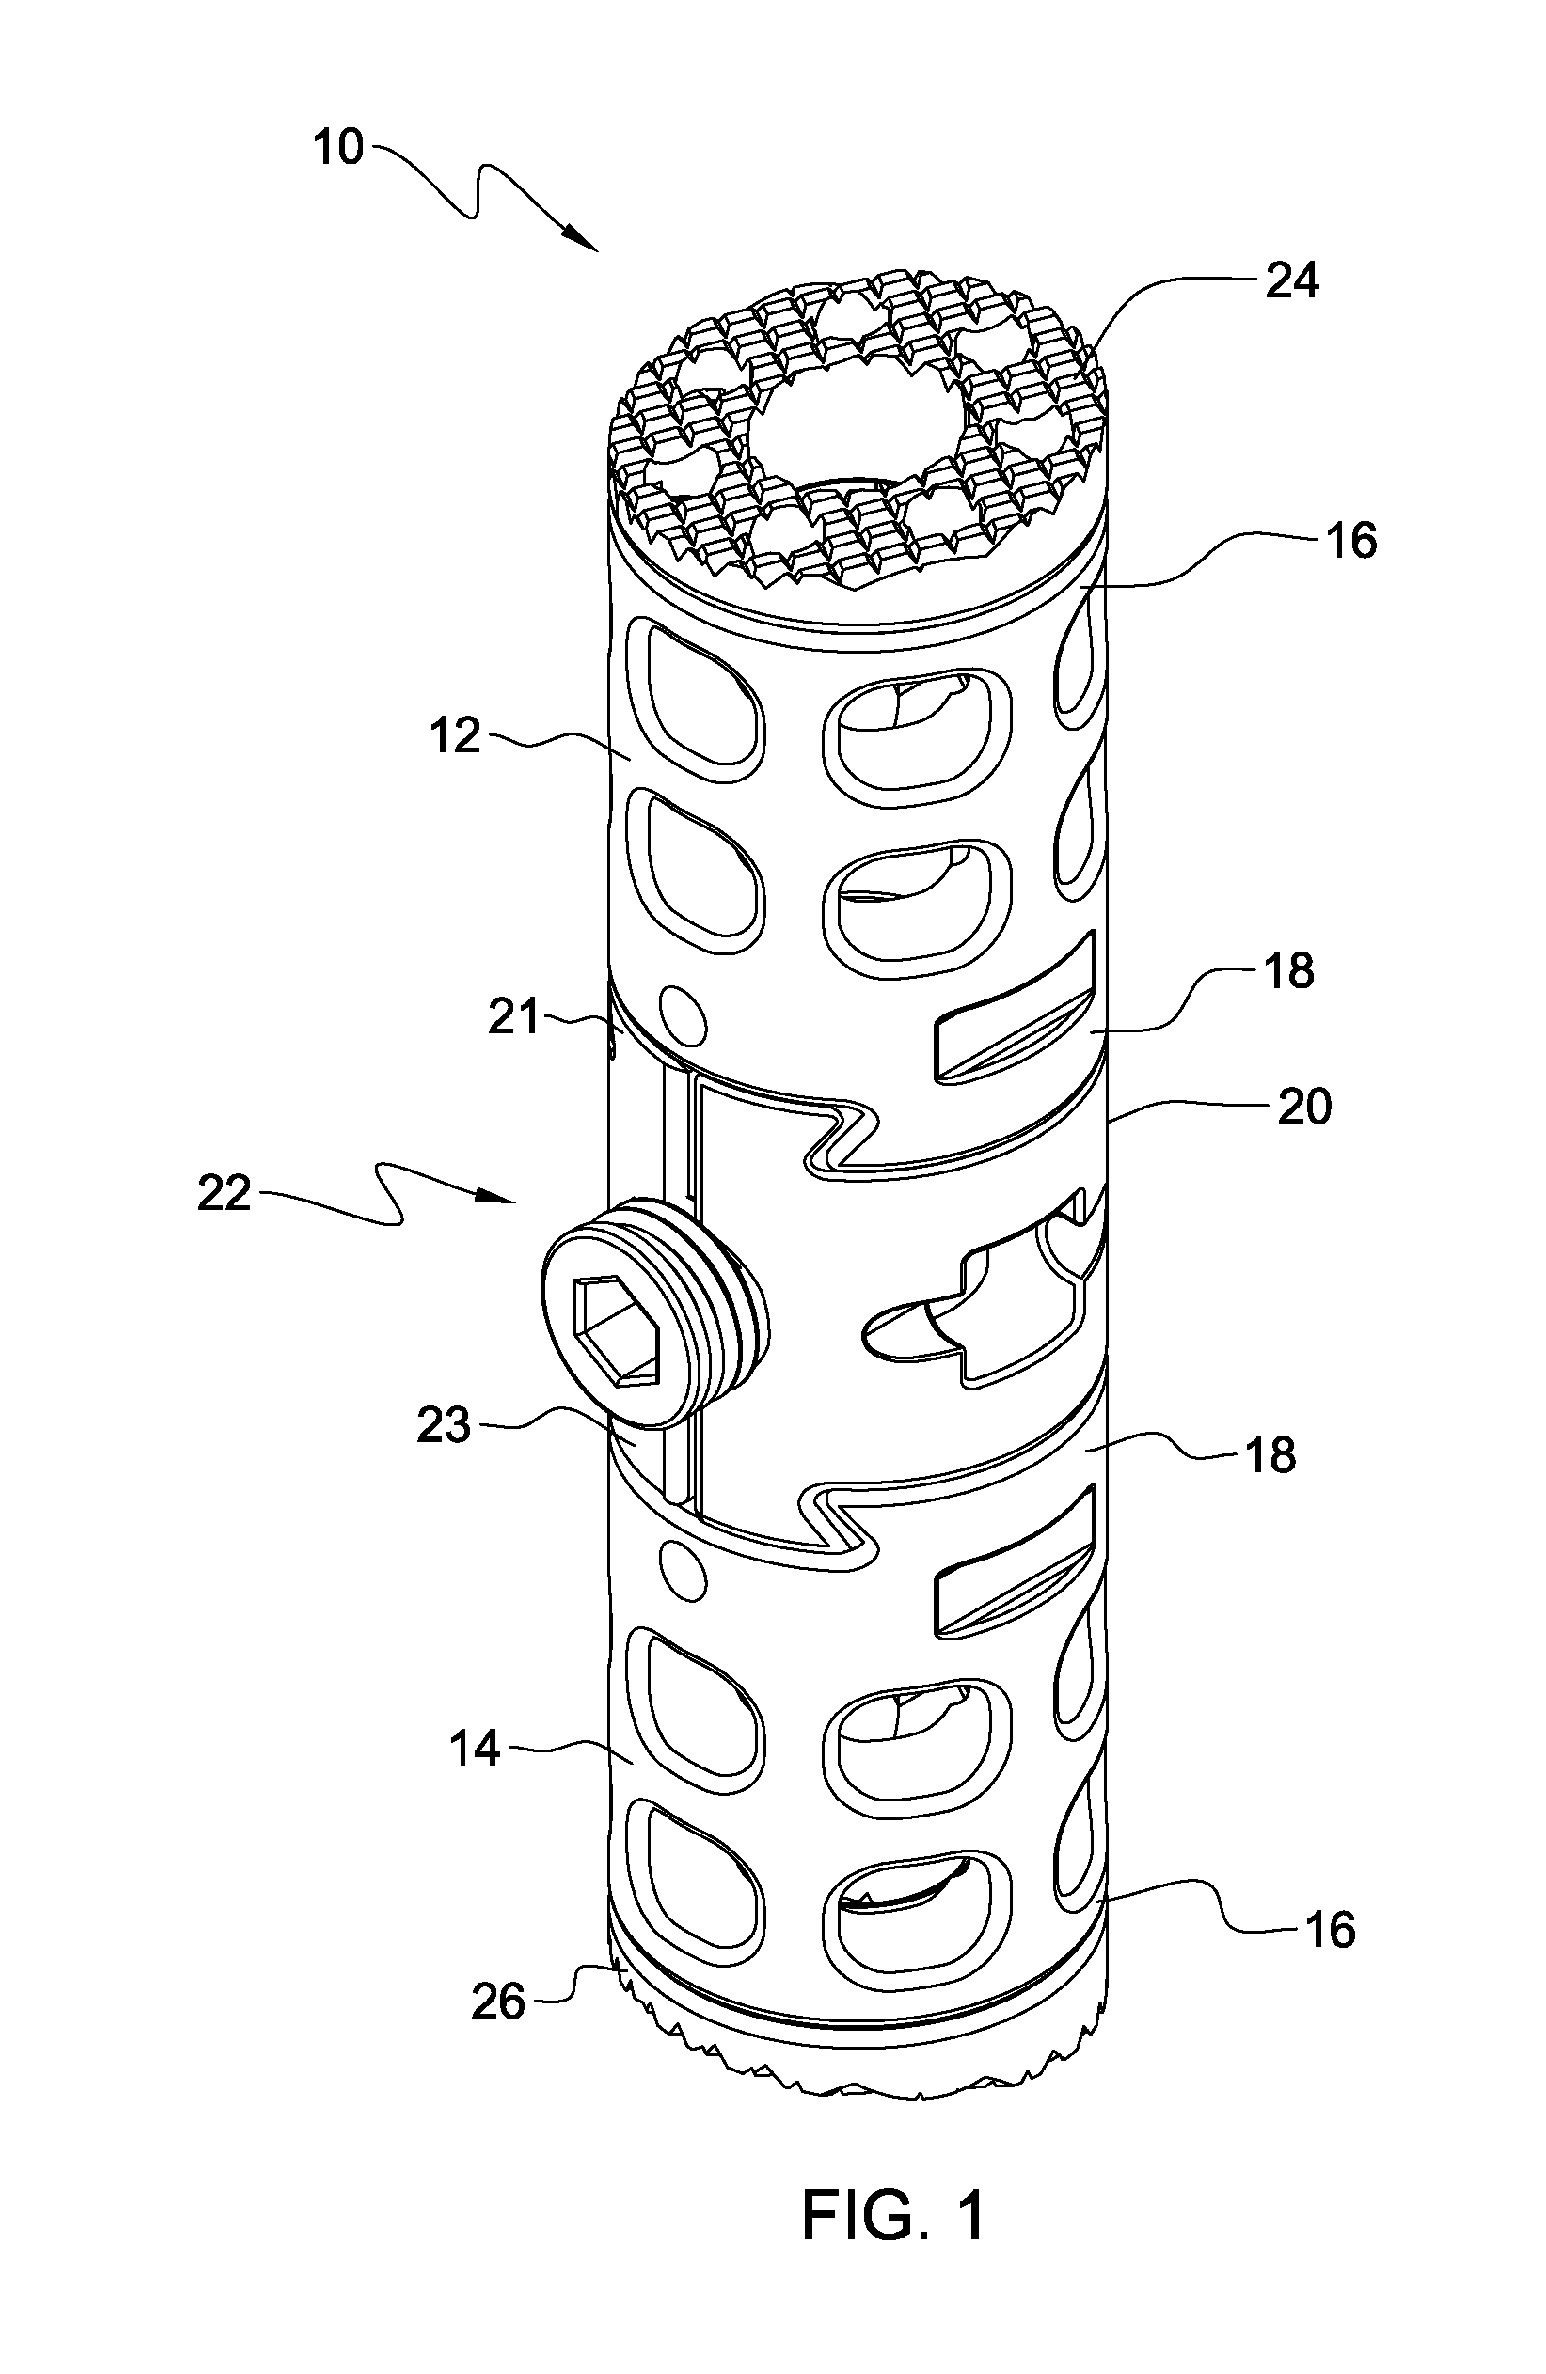 Tissue spacer implant, implant tool, and methods of use thereof